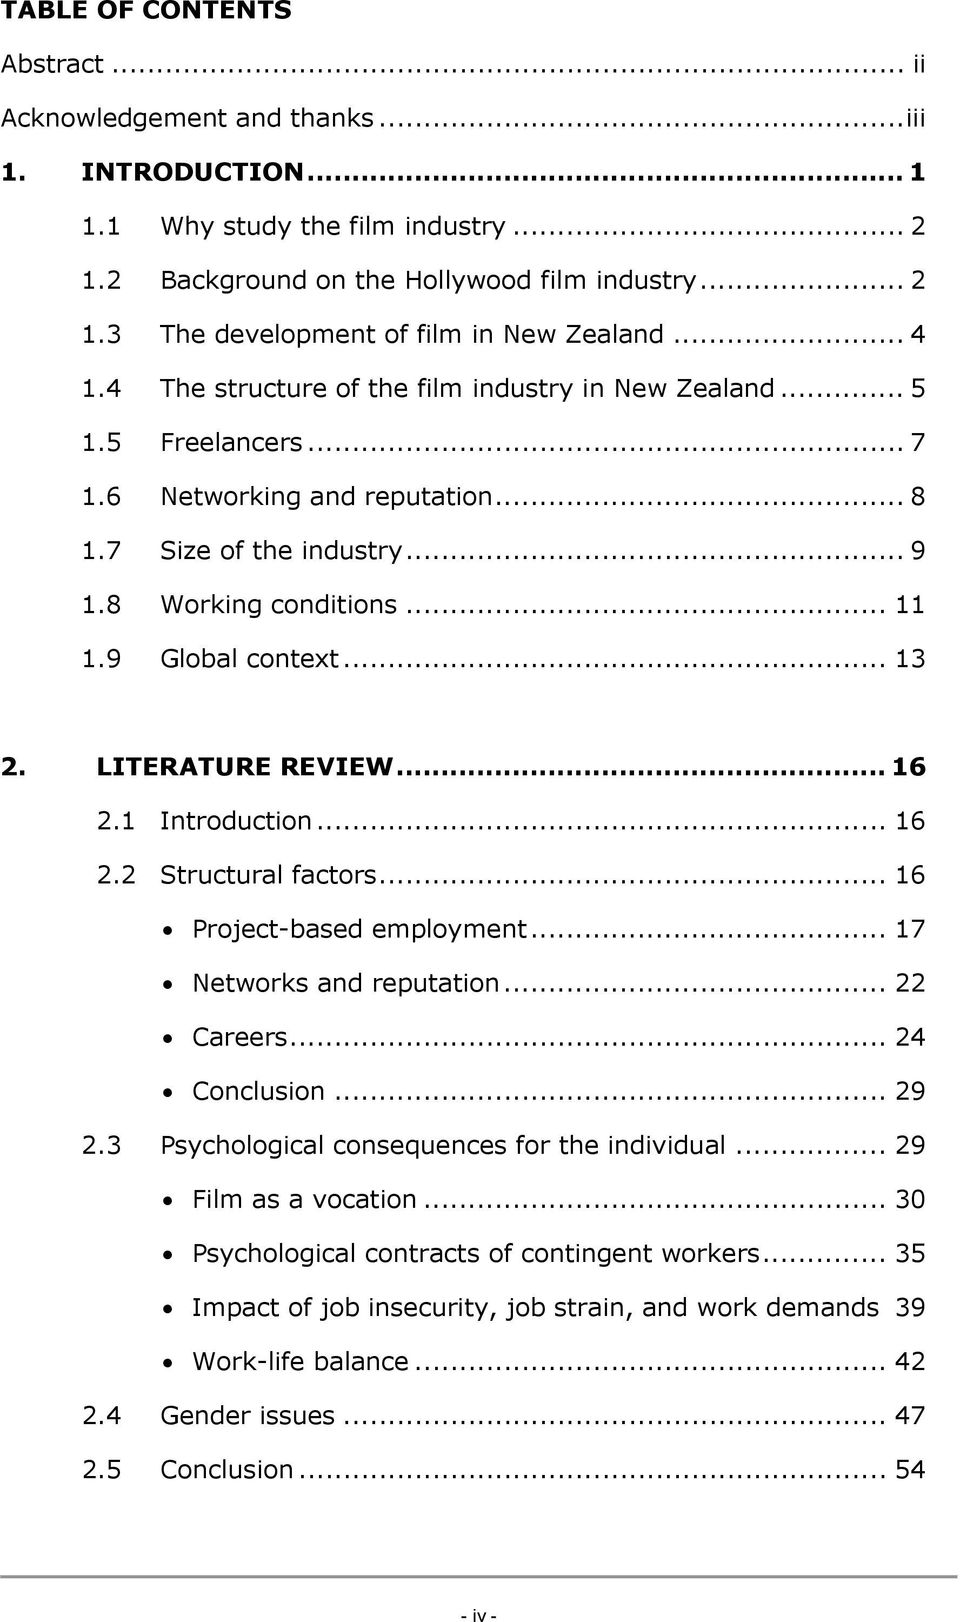 .. 13 2. LITERATURE REVIEW... 16 2.1 Introduction... 16 2.2 Structural factors... 16 Project-based employment... 17 Networks and reputation... 22 Careers... 24 Conclusion... 29 2.